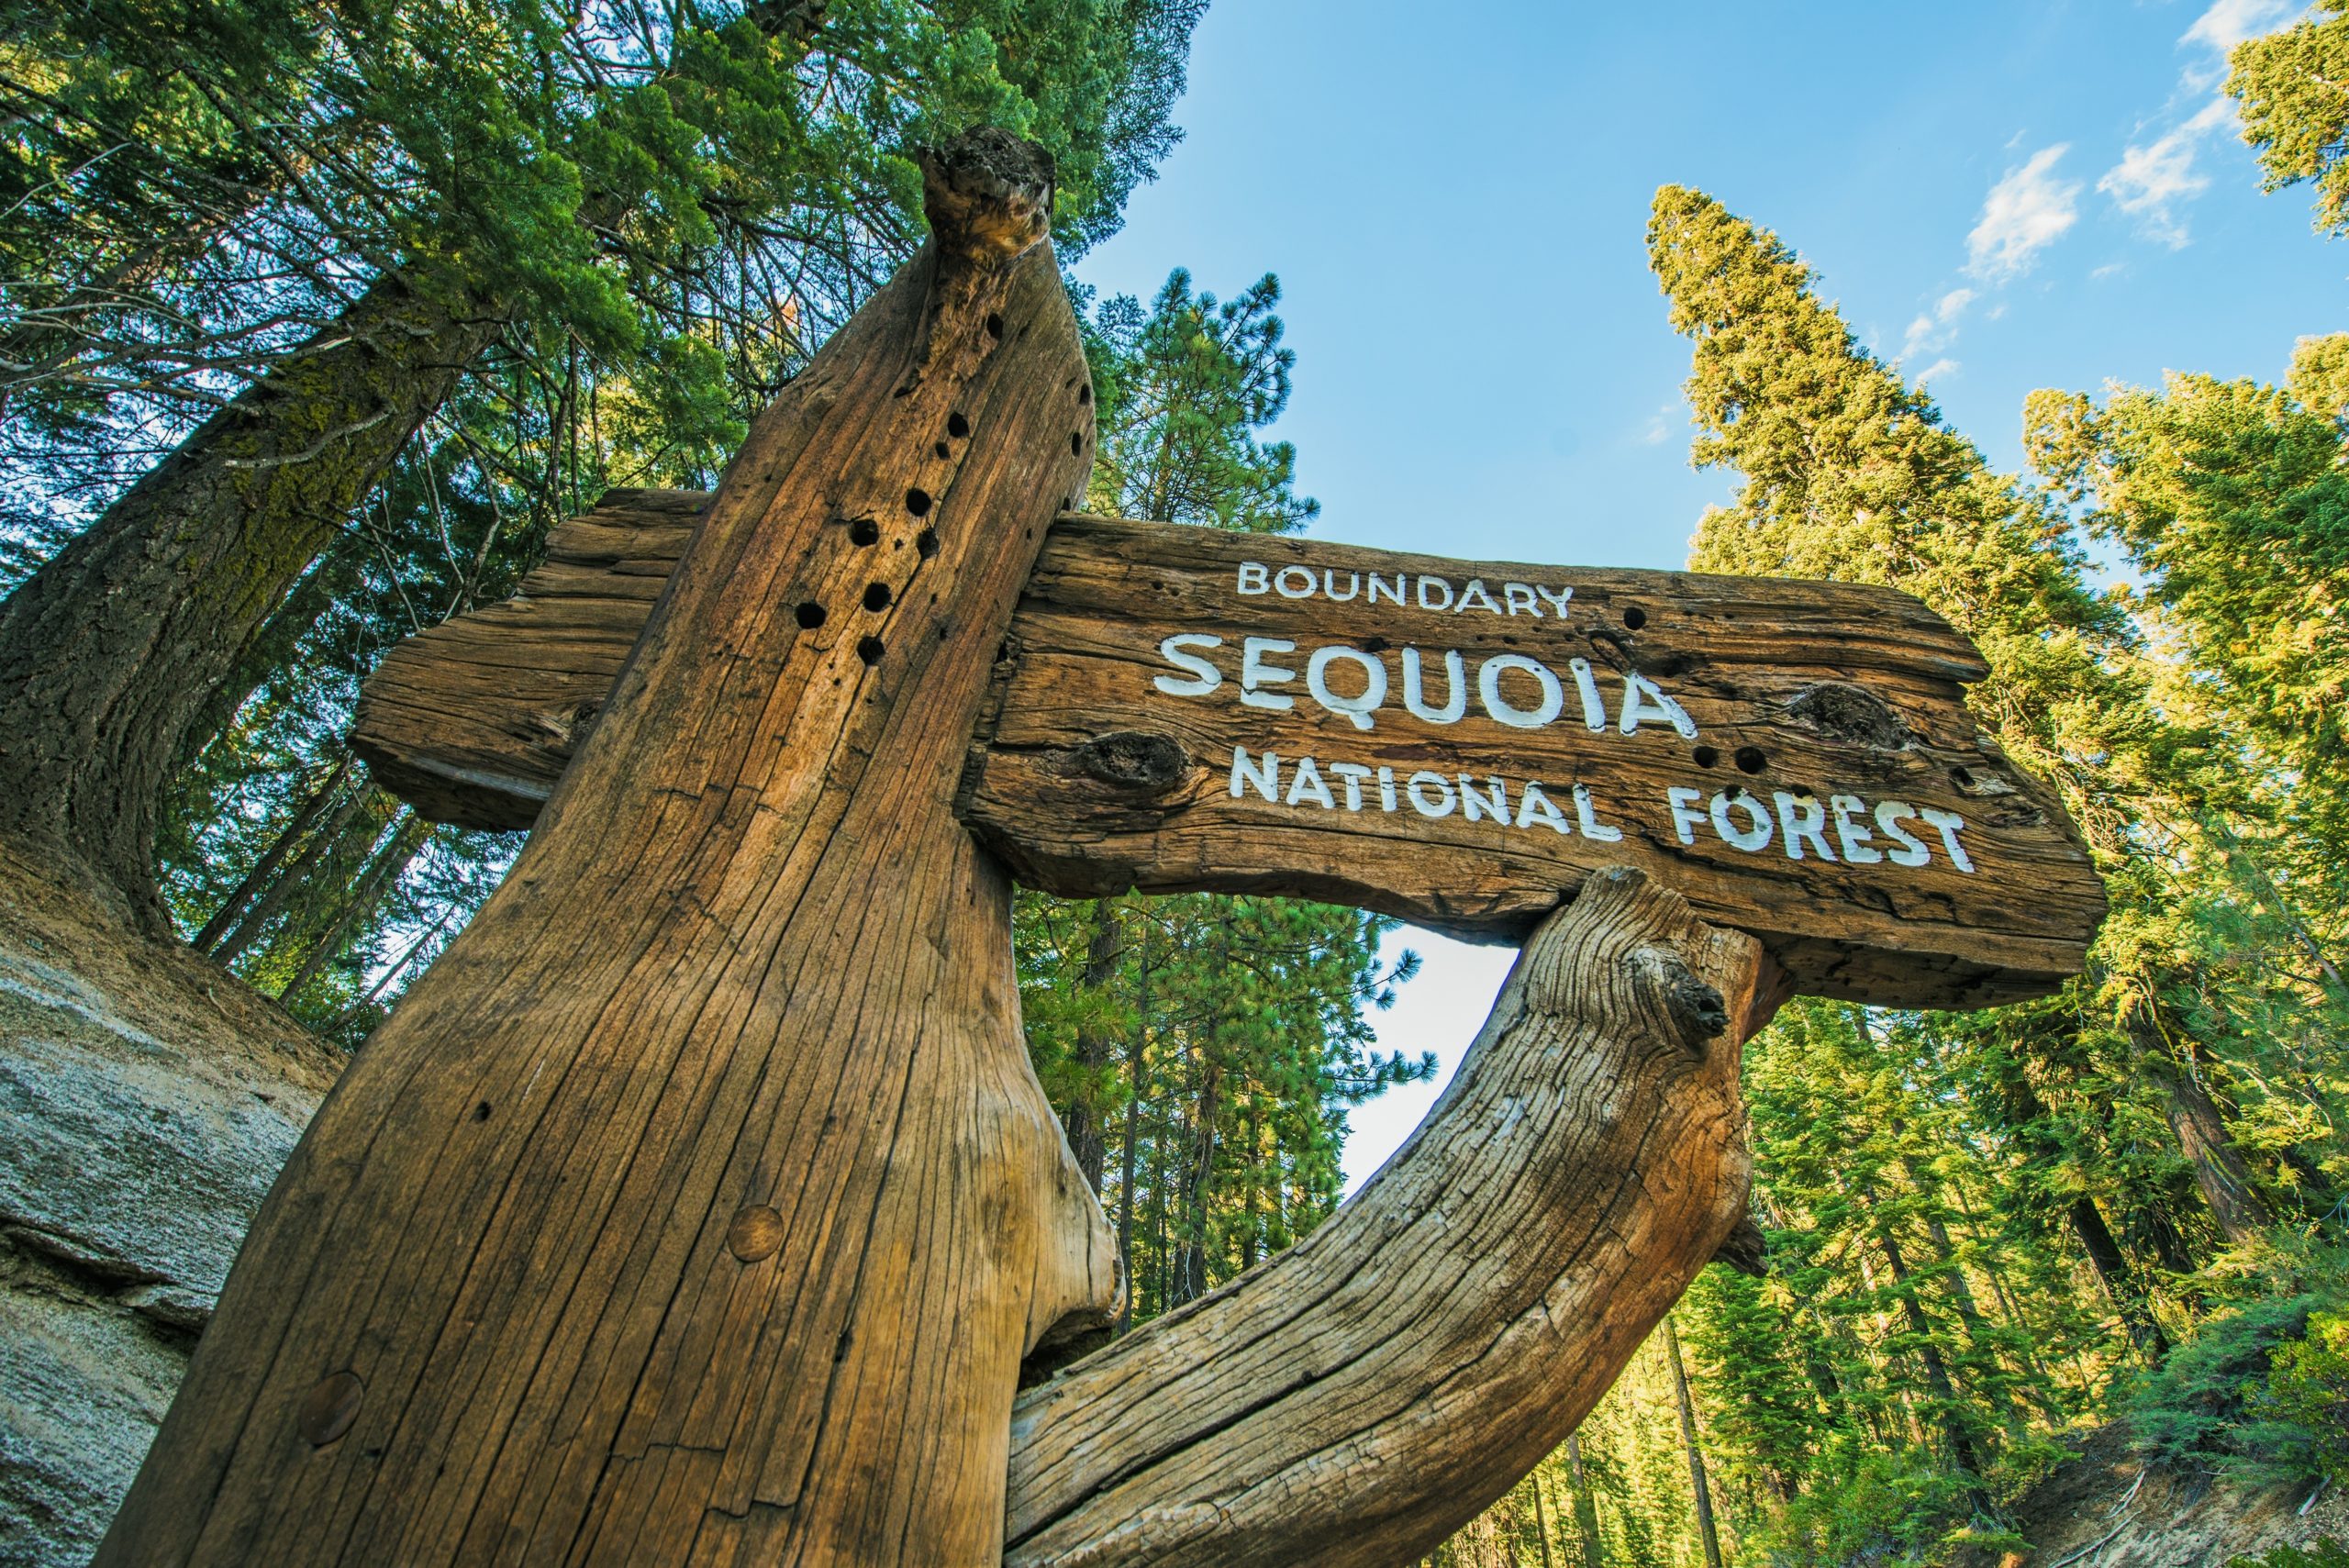 Sequoia National Forest [Shutterstock]